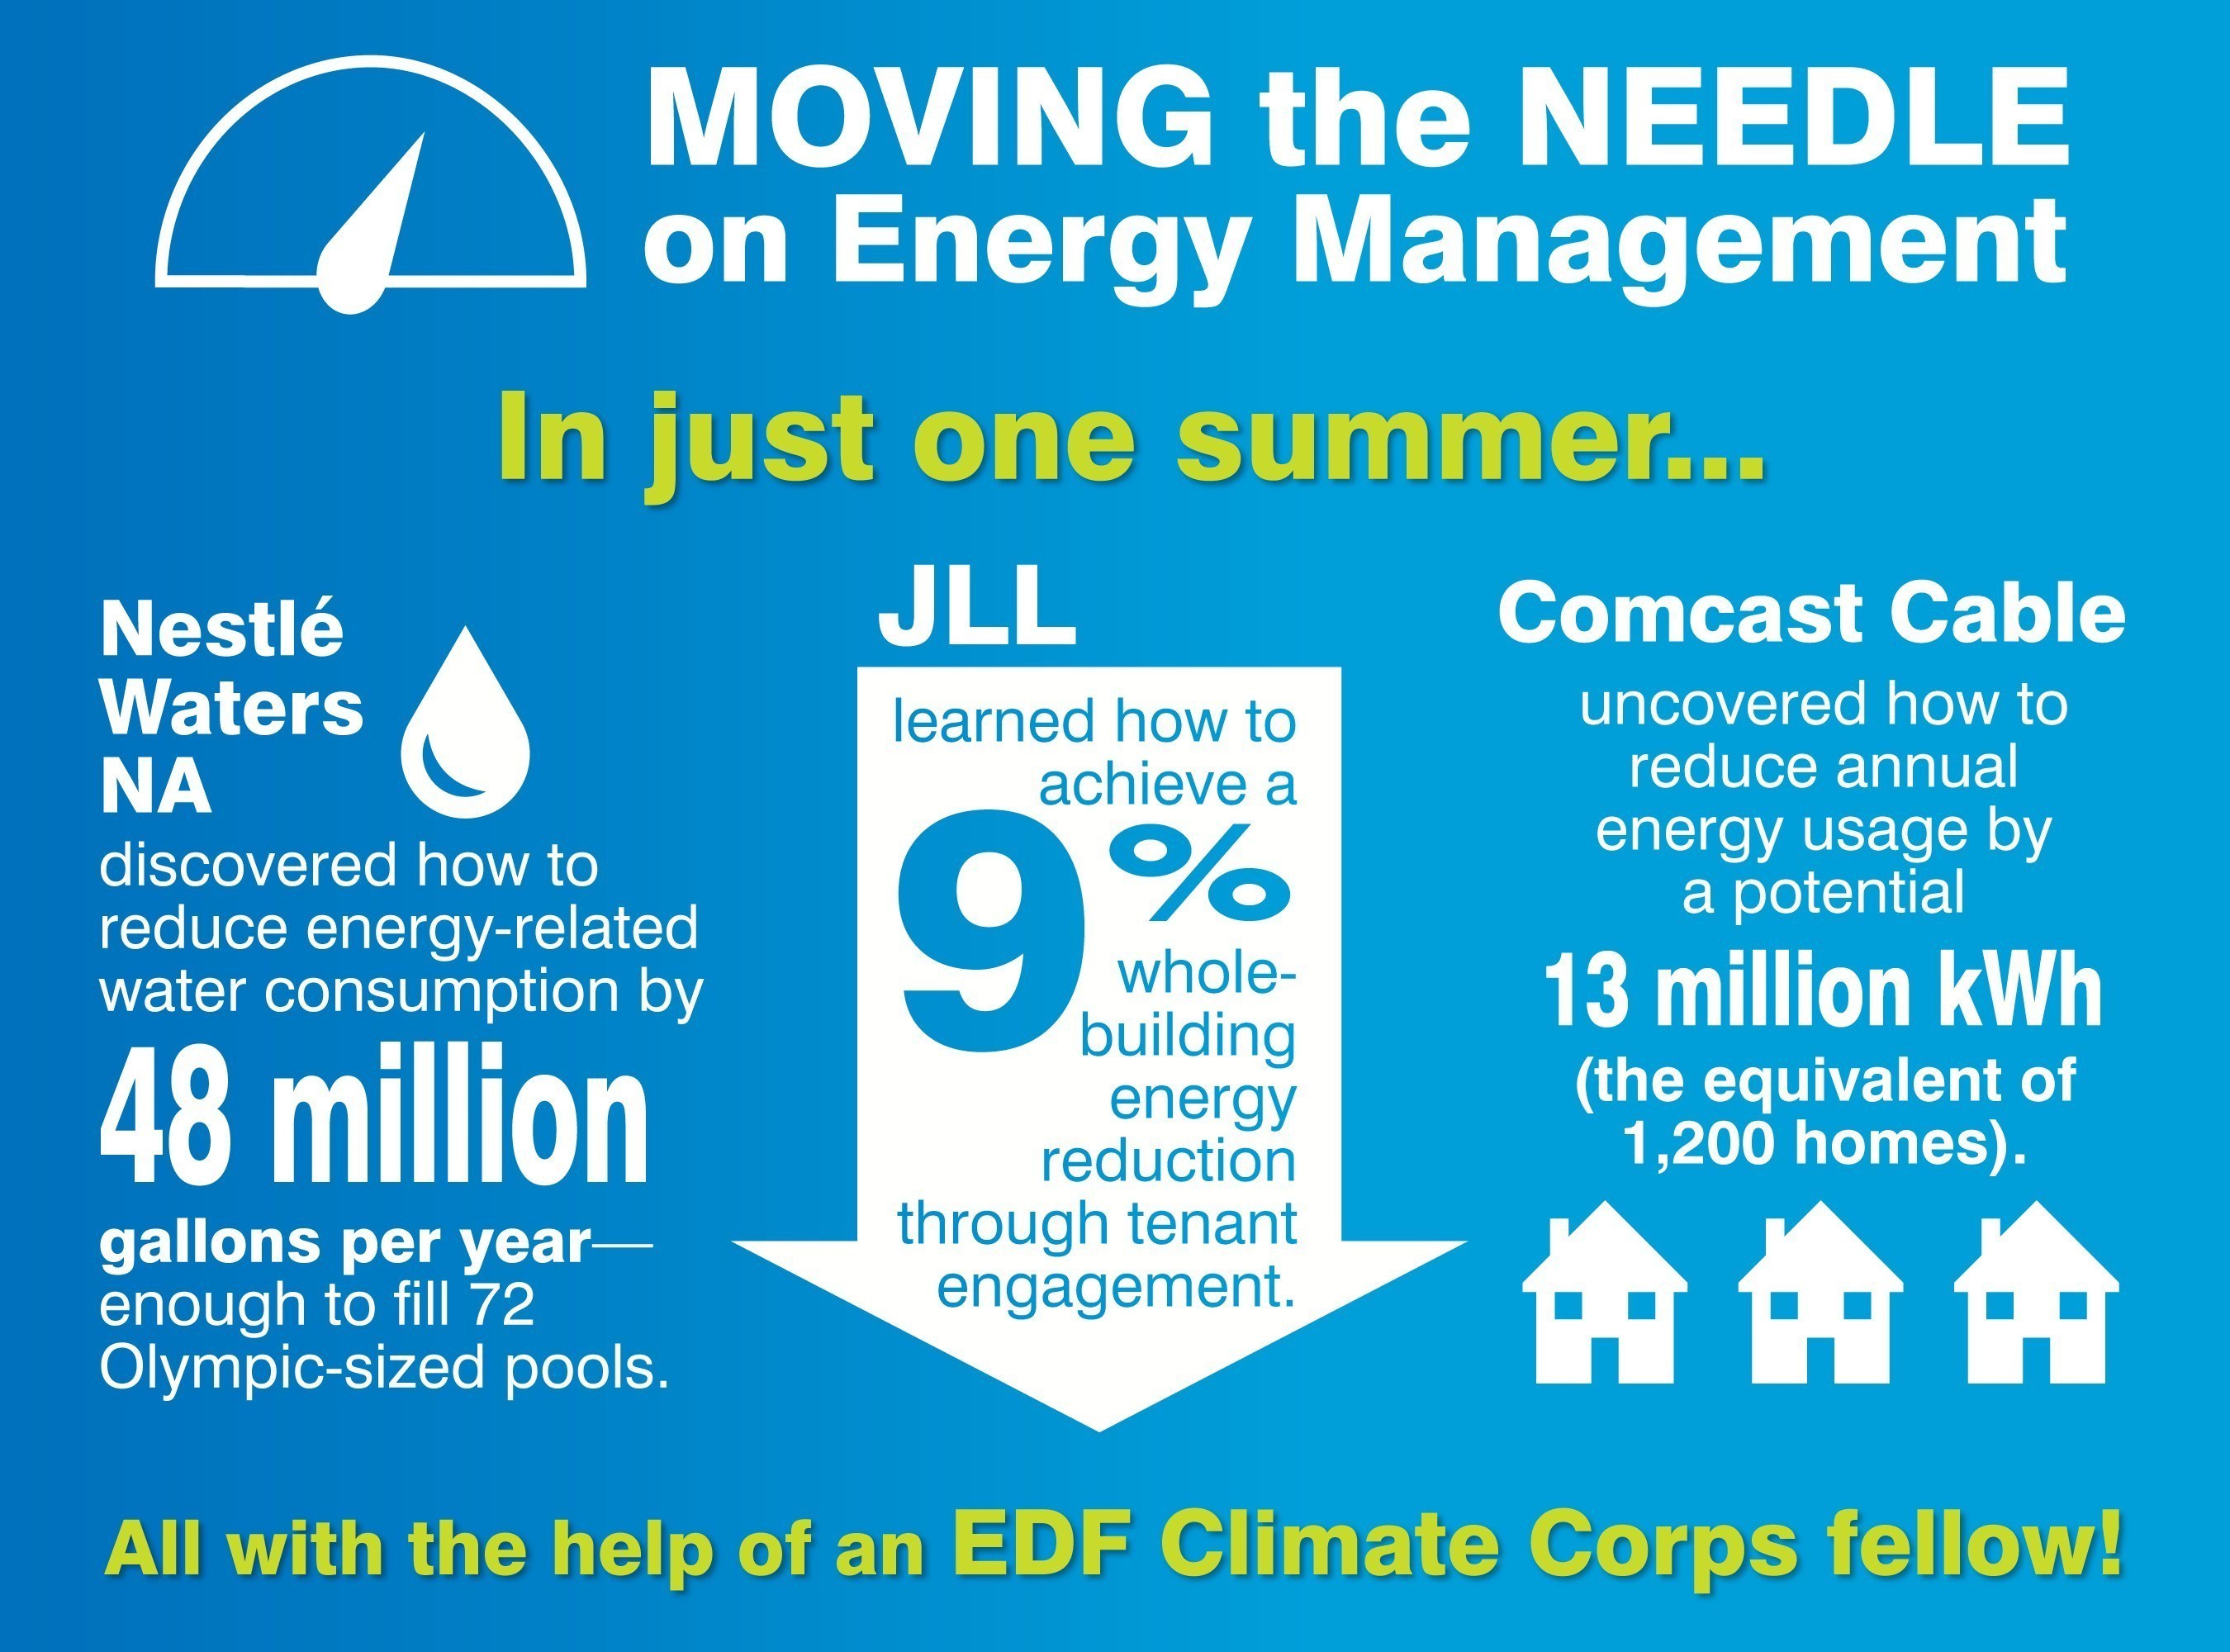 In 2015, EDF Climate Corps helped Nestle Waters, JLL and Comcast Cable move the needle on energy management